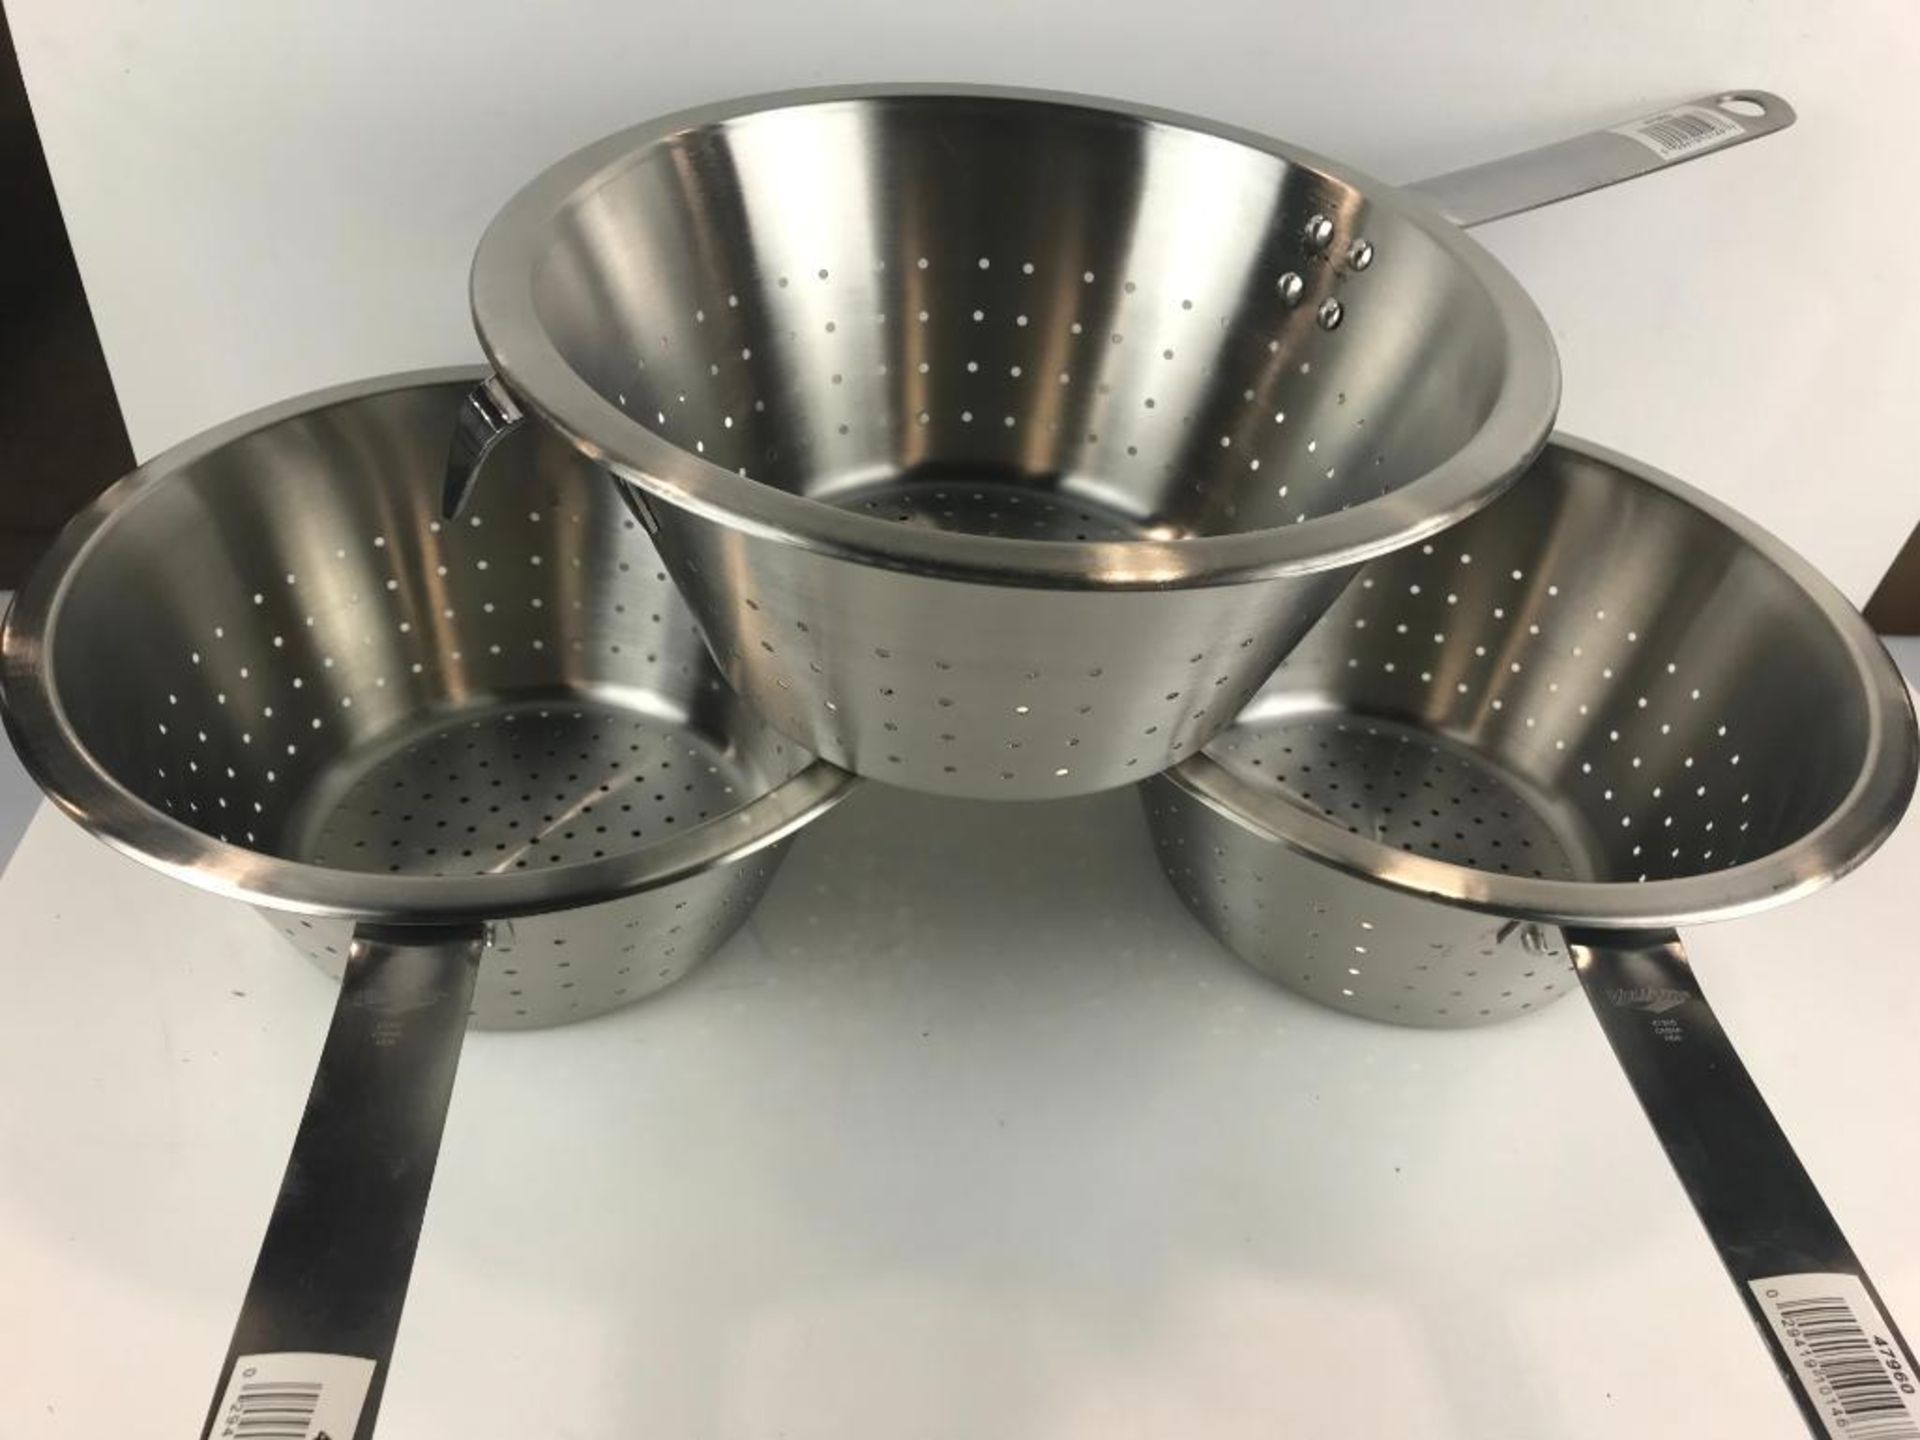 VOLLRATH 47960 HEAVY STAINLESS STEEL 10.5" X 4" SPAGHETTI COOKER/STRAINER, LOT OF 3 - Image 3 of 3